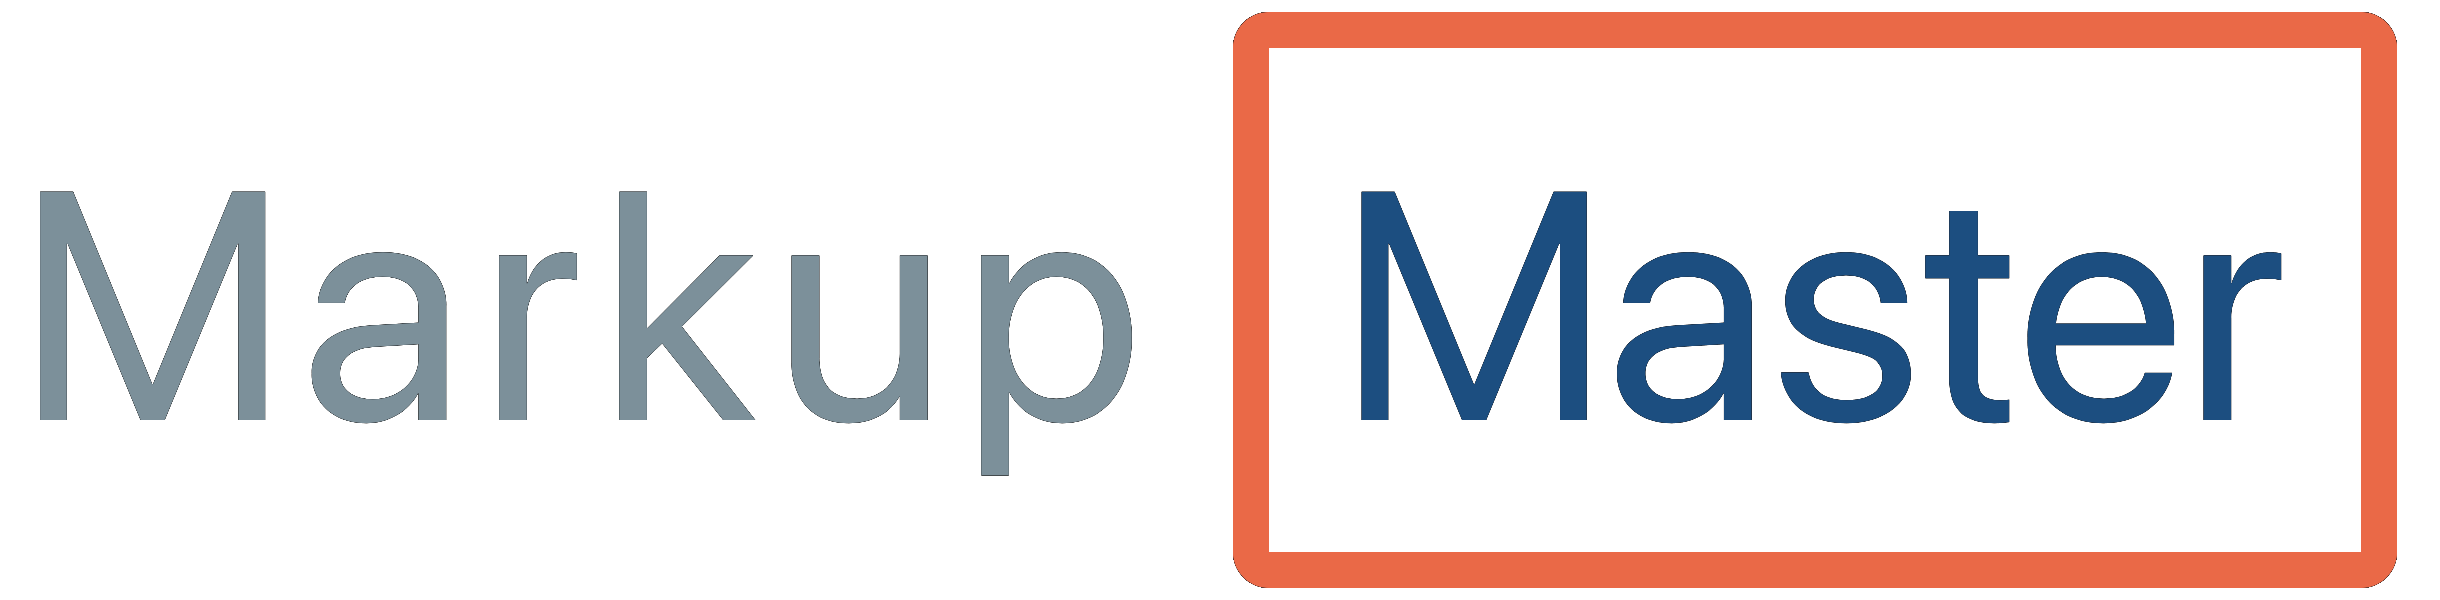 Markup Master: GPT, HTML, and Asking Nicely